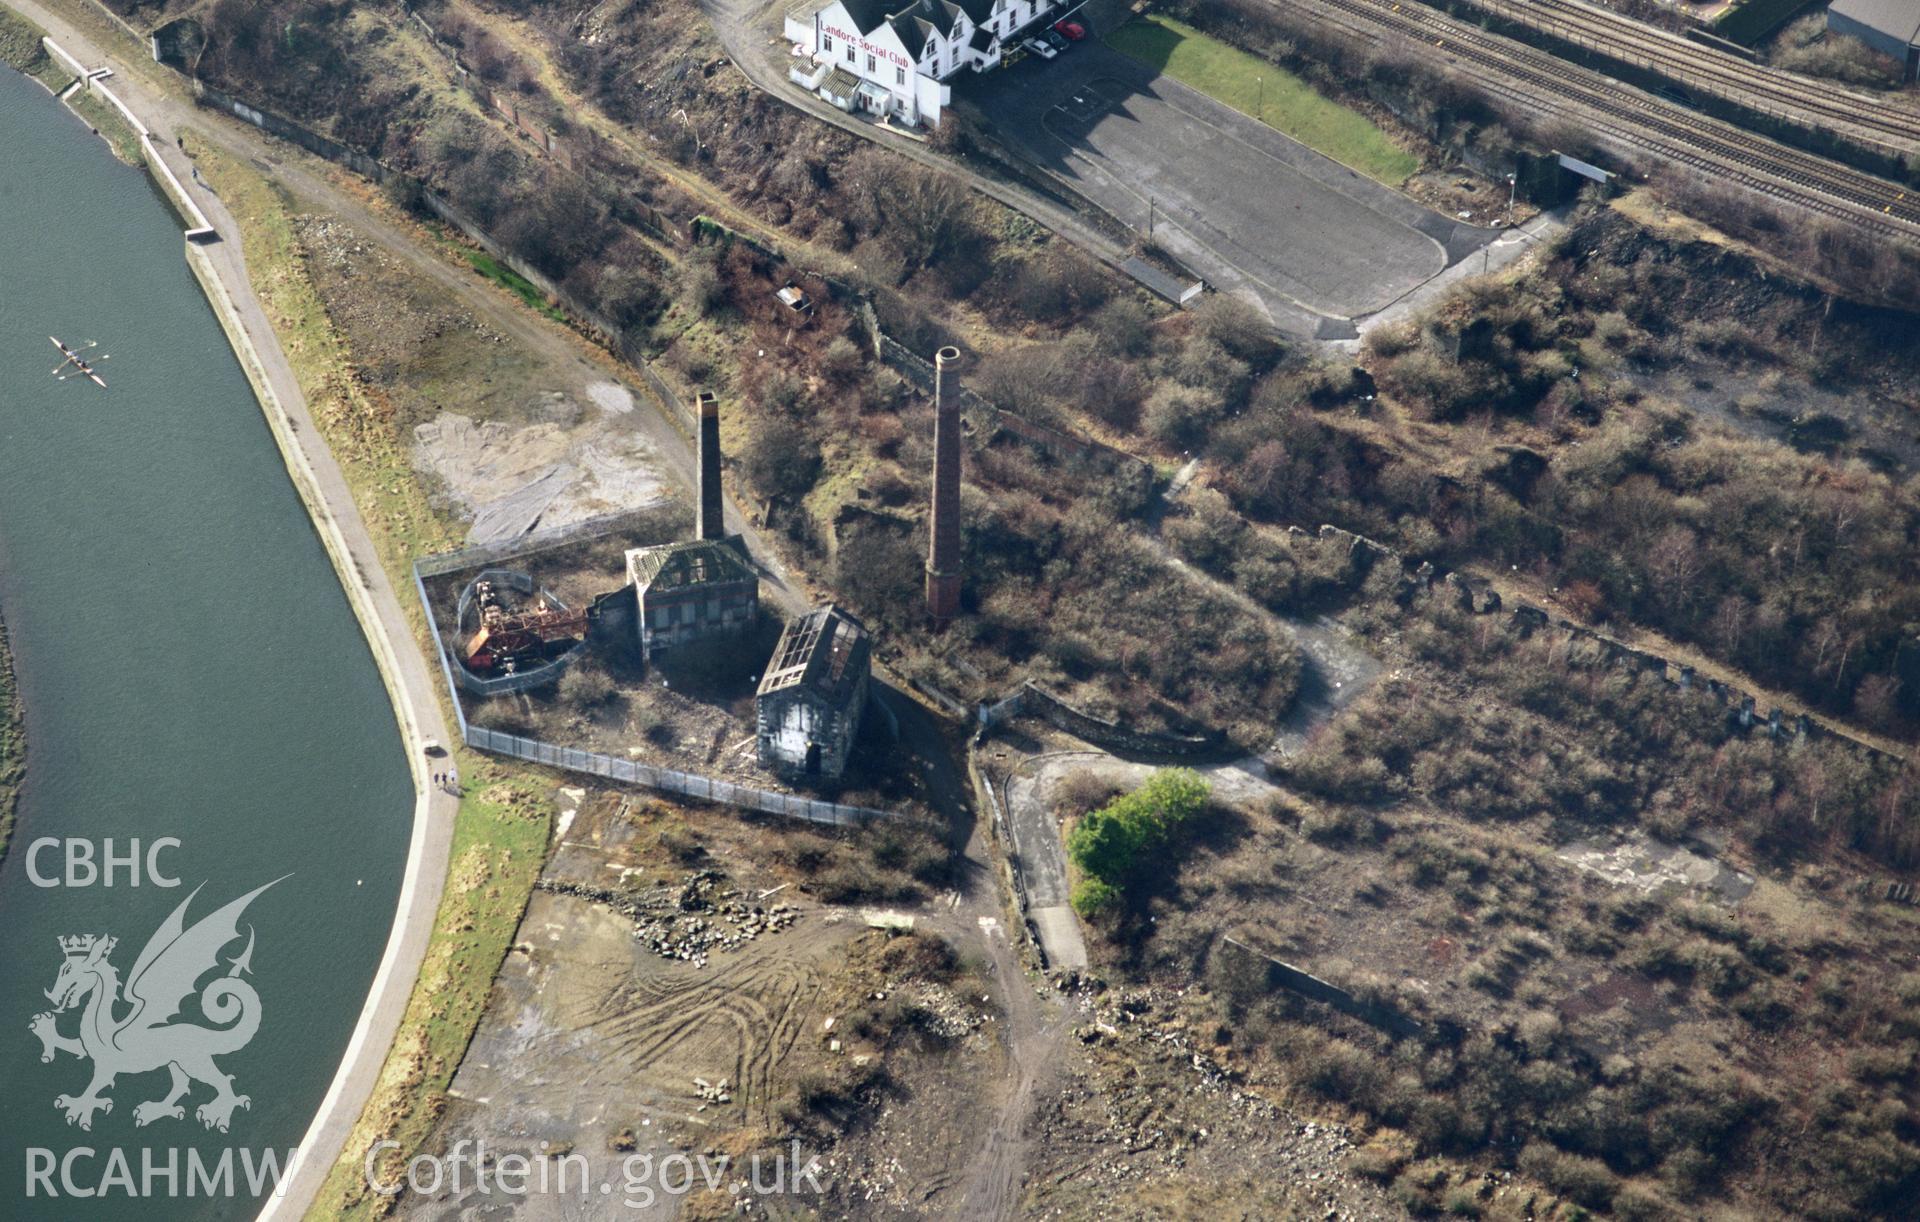 Slide of RCAHMW colour oblique aerial photograph of Hafod Copperworks, Swansea, taken by C.R. Musson, 15/2/1997.